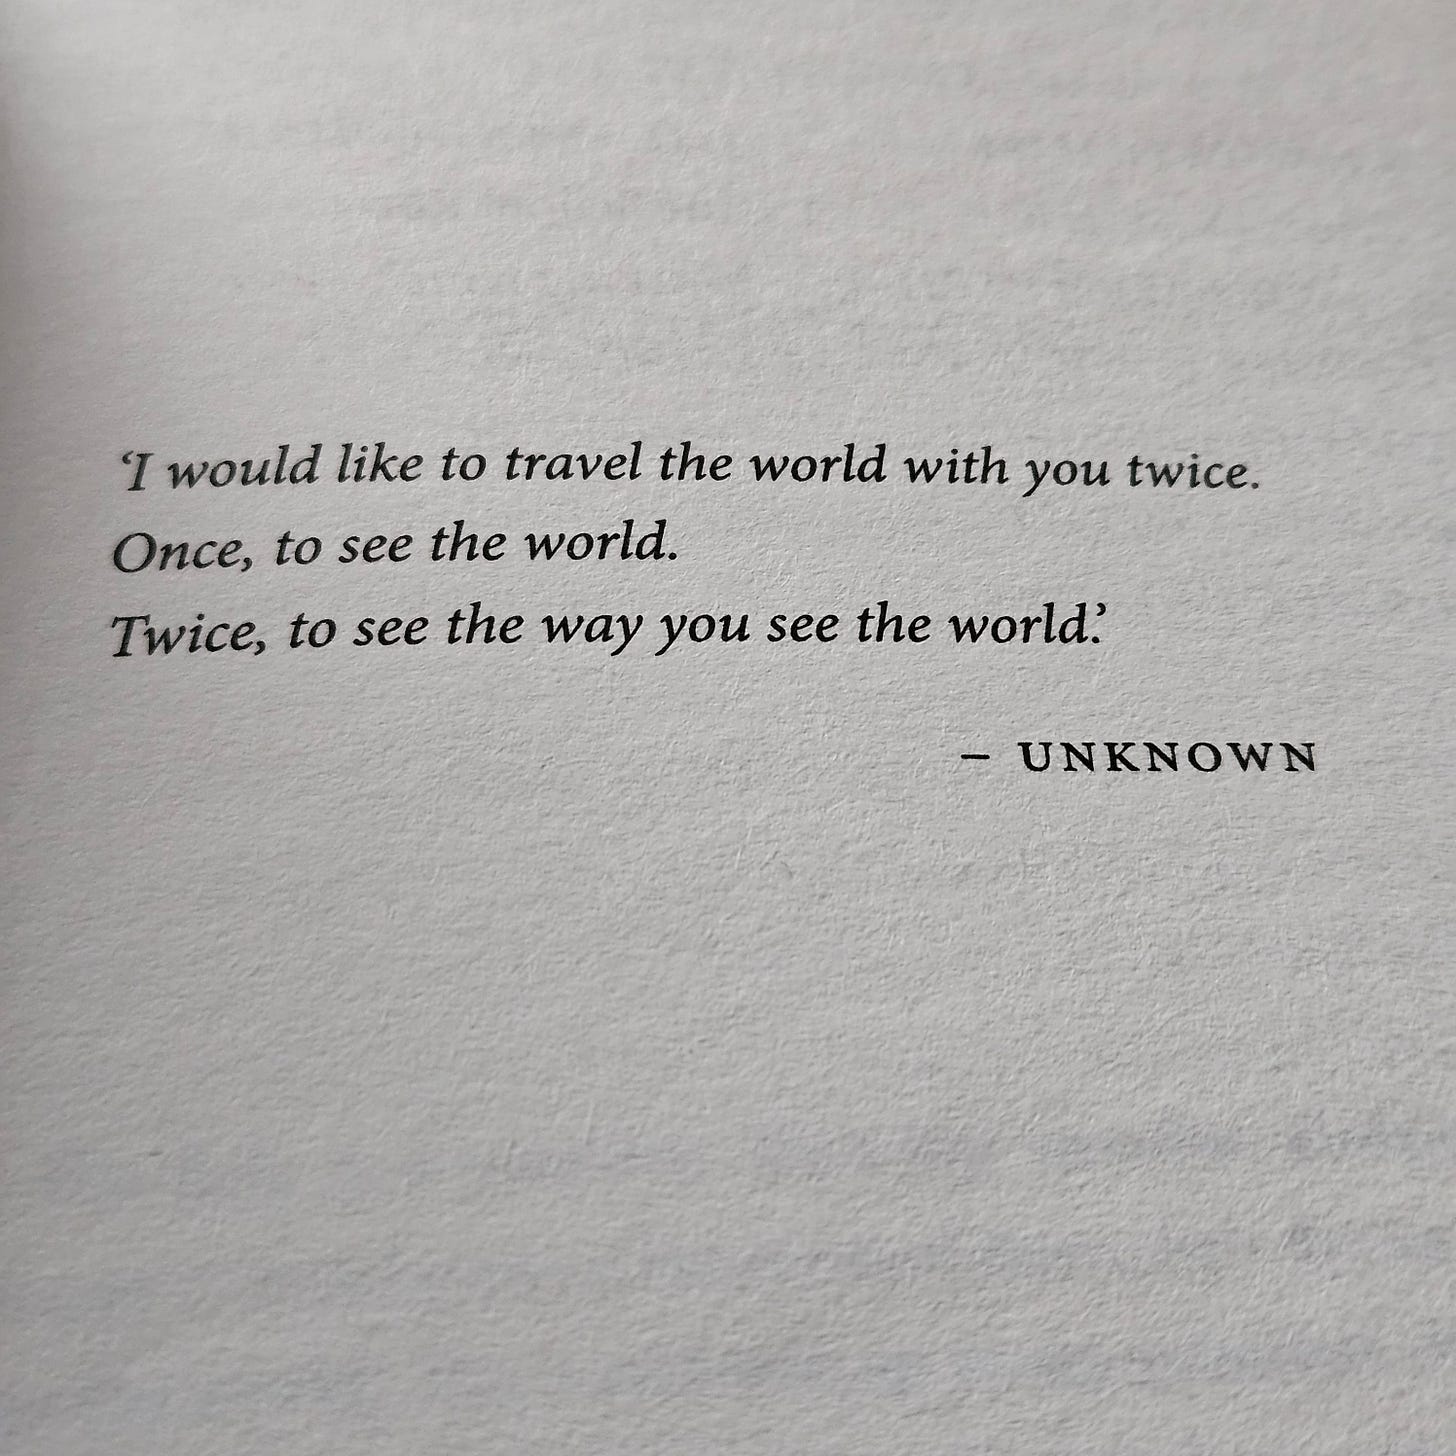 A book opening page stating, 'I would like to travel the world with you twice. Once, to see the world. Twice, to see the way you see the world.'